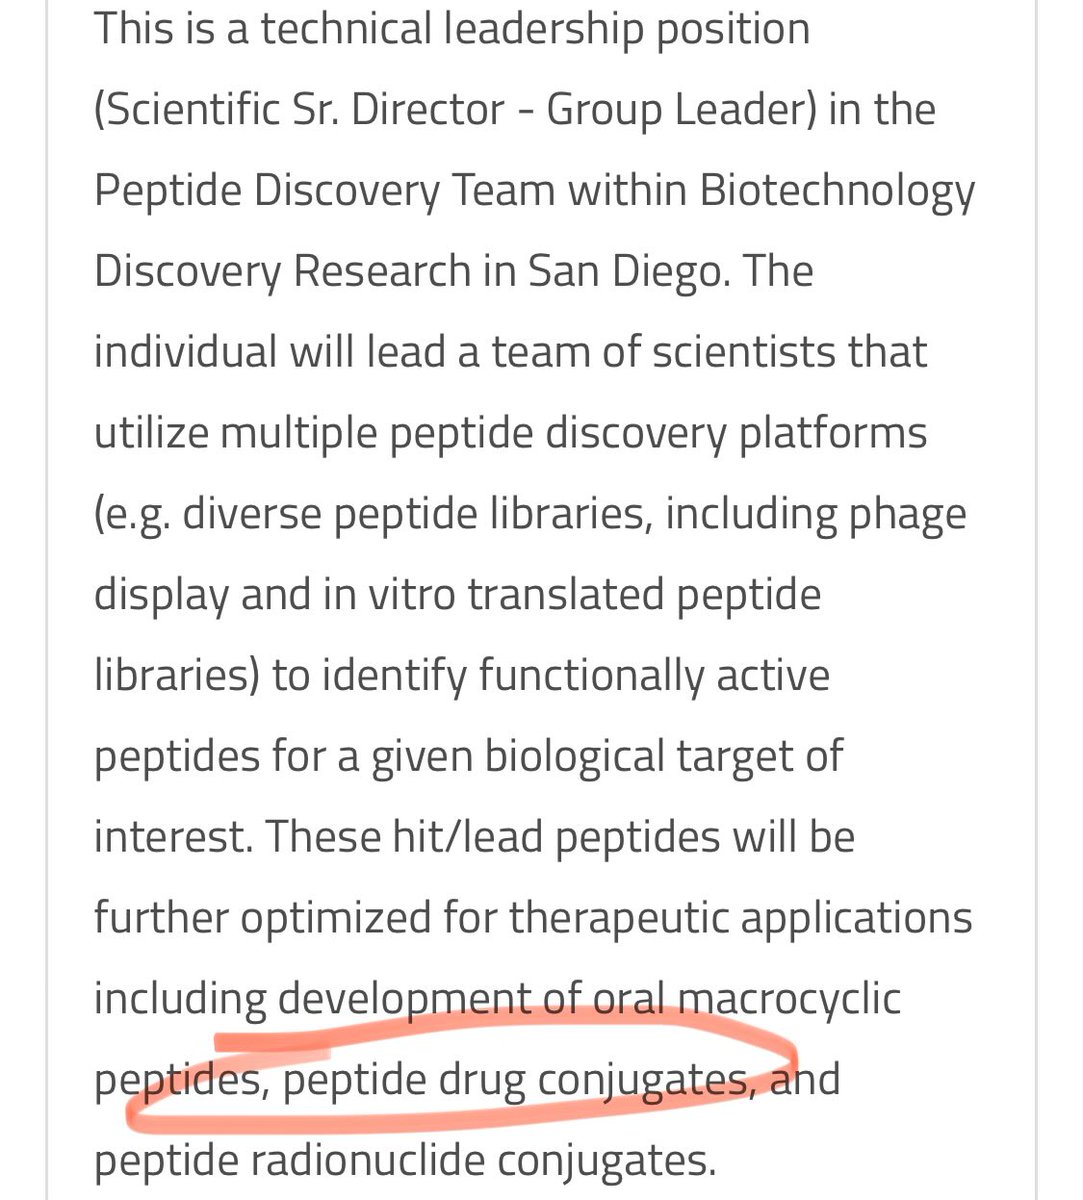 Eli Lilly shown its hand re. its peptide ambitions by hiring Scientific Snr Director - Peptide Discovery. This is beyond Radioligand (POINT’s focus) + includes PDCs. Novartis + EL now demonstrably investing in PDC. #AVCT is in the sweet spot technology-wise… ignore the noise!